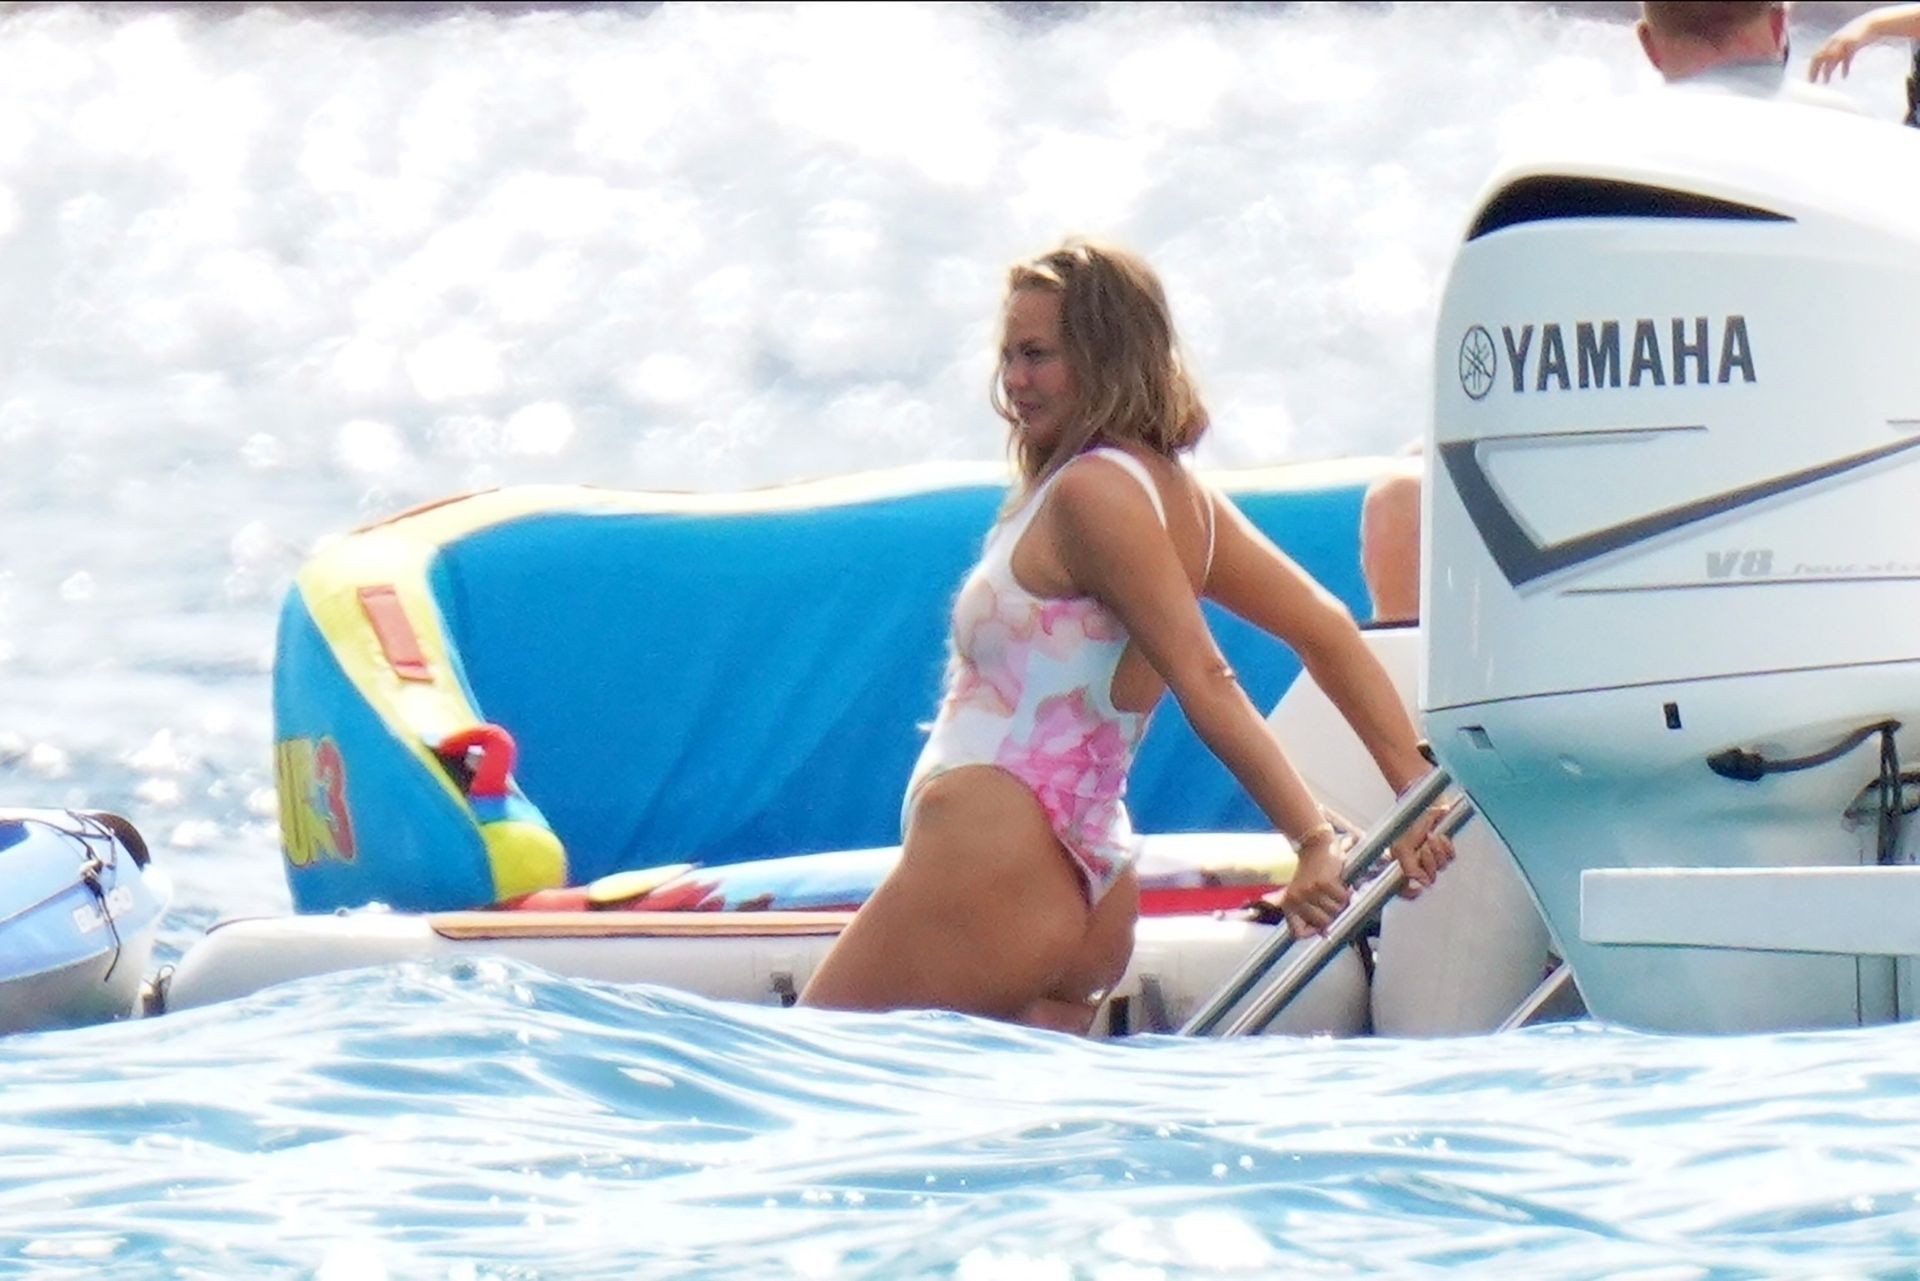 John Legend & Chrissy Teigen Have an Active Day Out on the Water in St Barts (16 Photos)